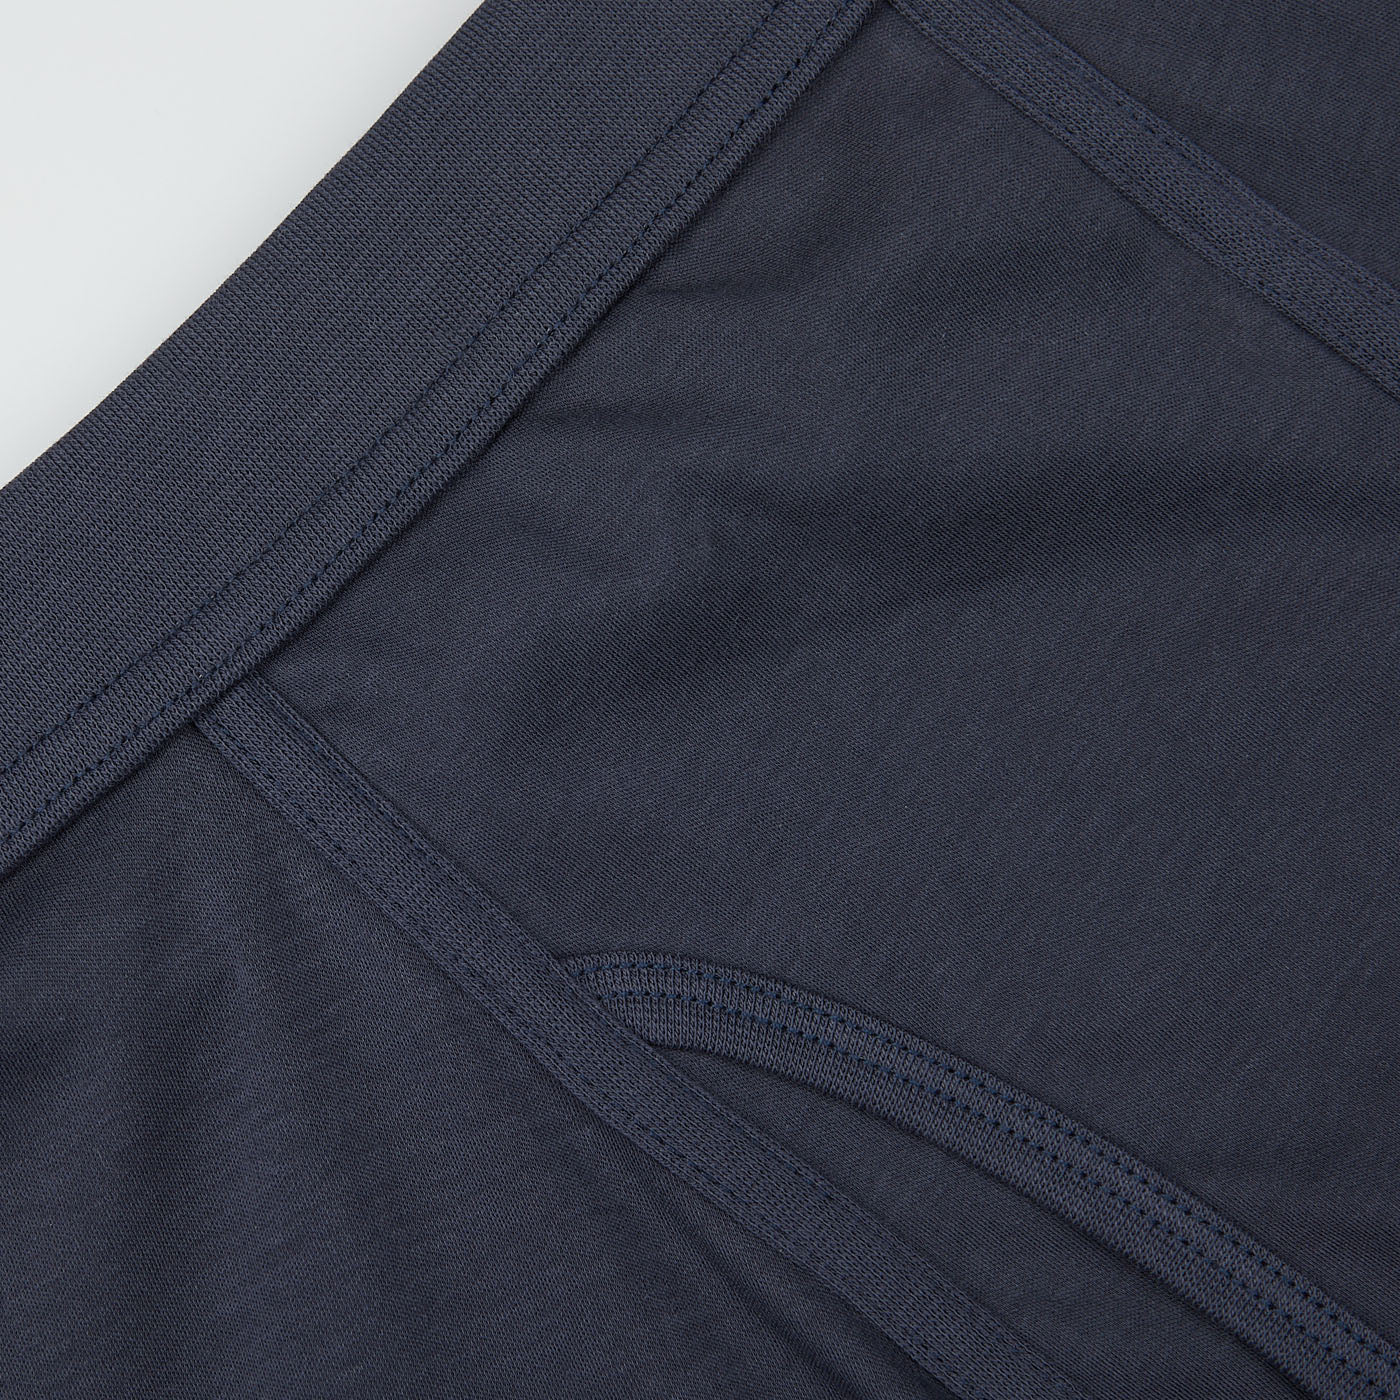 Close-up image of dark blue Parisian Night Pima Cotton Wil Trunks made from organic pima cotton by The White Briefs.